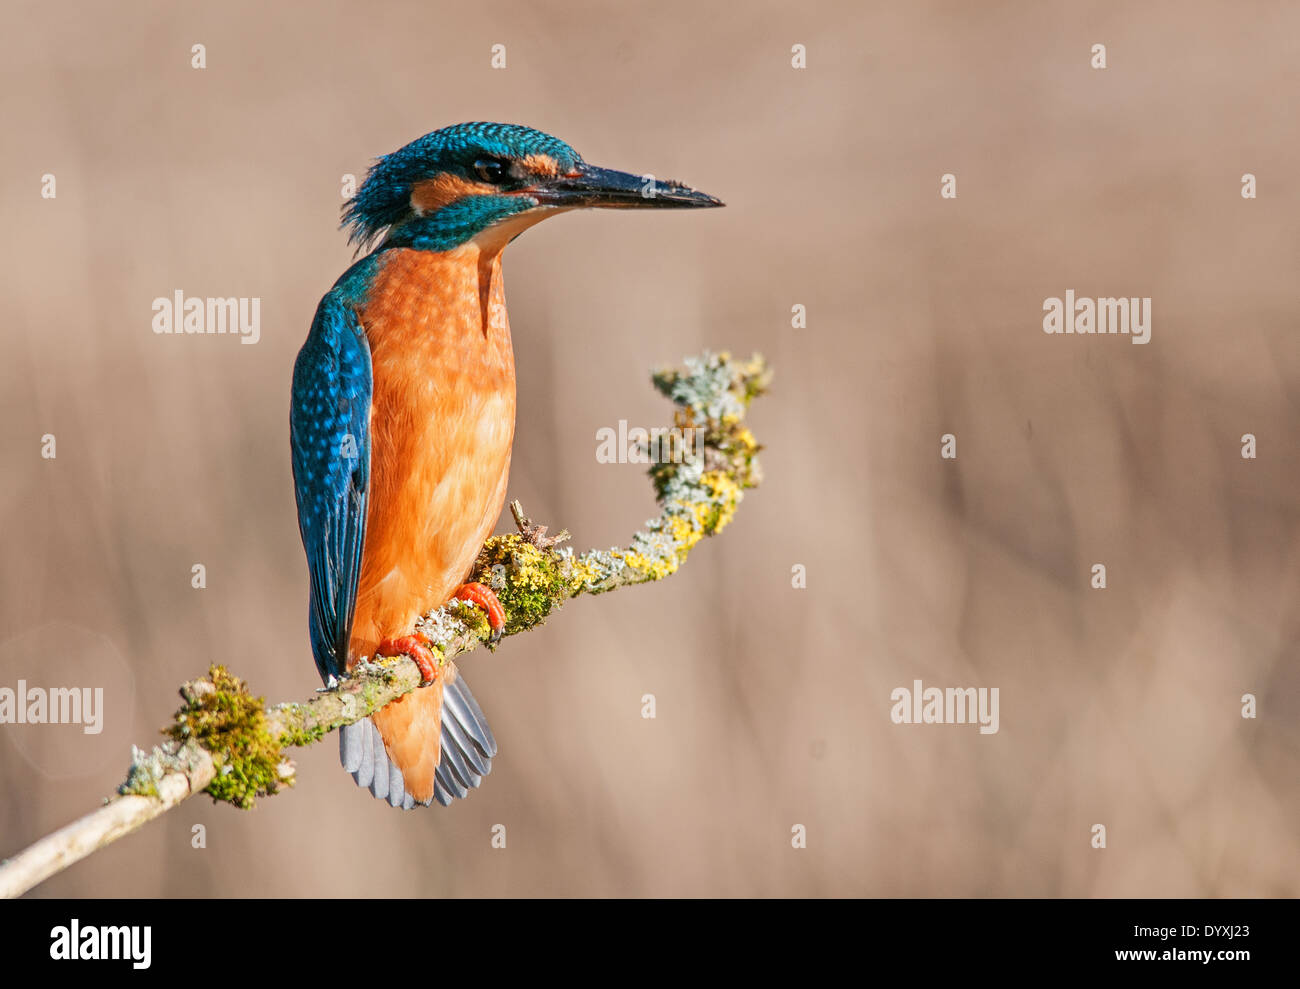 Male Kingfisher perched Stock Photo